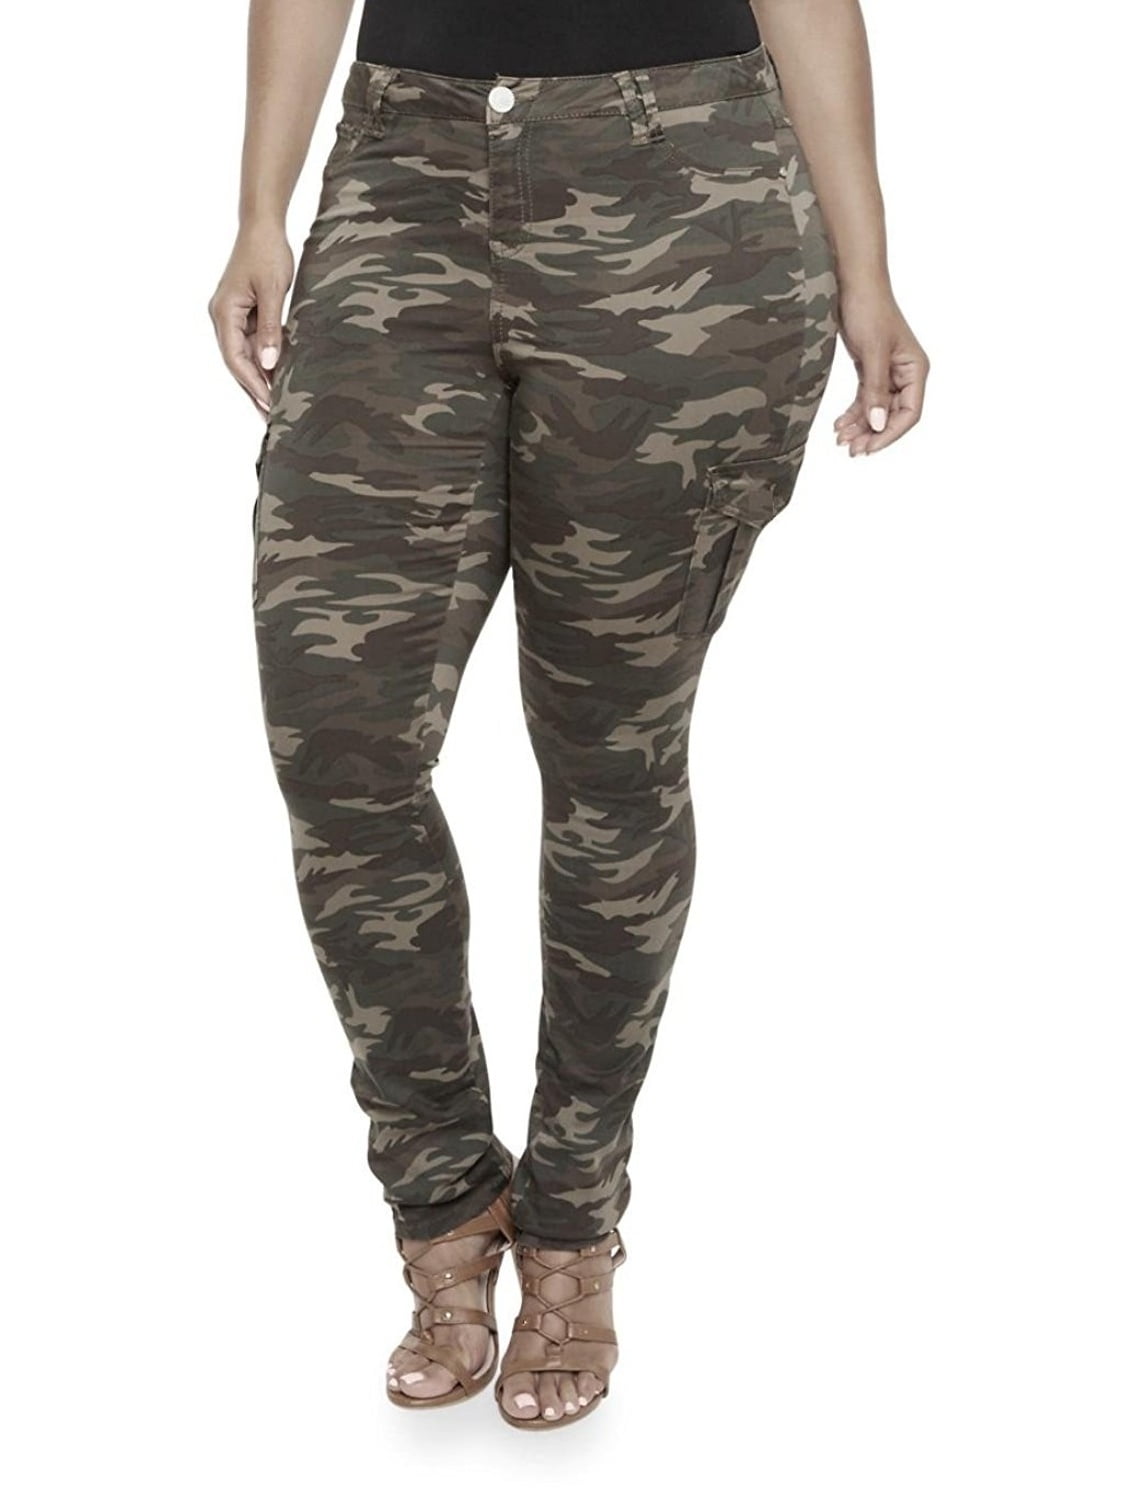 Amazoncom Womens Casual Camo Pants High Waist Cargo Trousers Running Pants  Plus Size Camouflage XL  Clothing Shoes  Jewelry